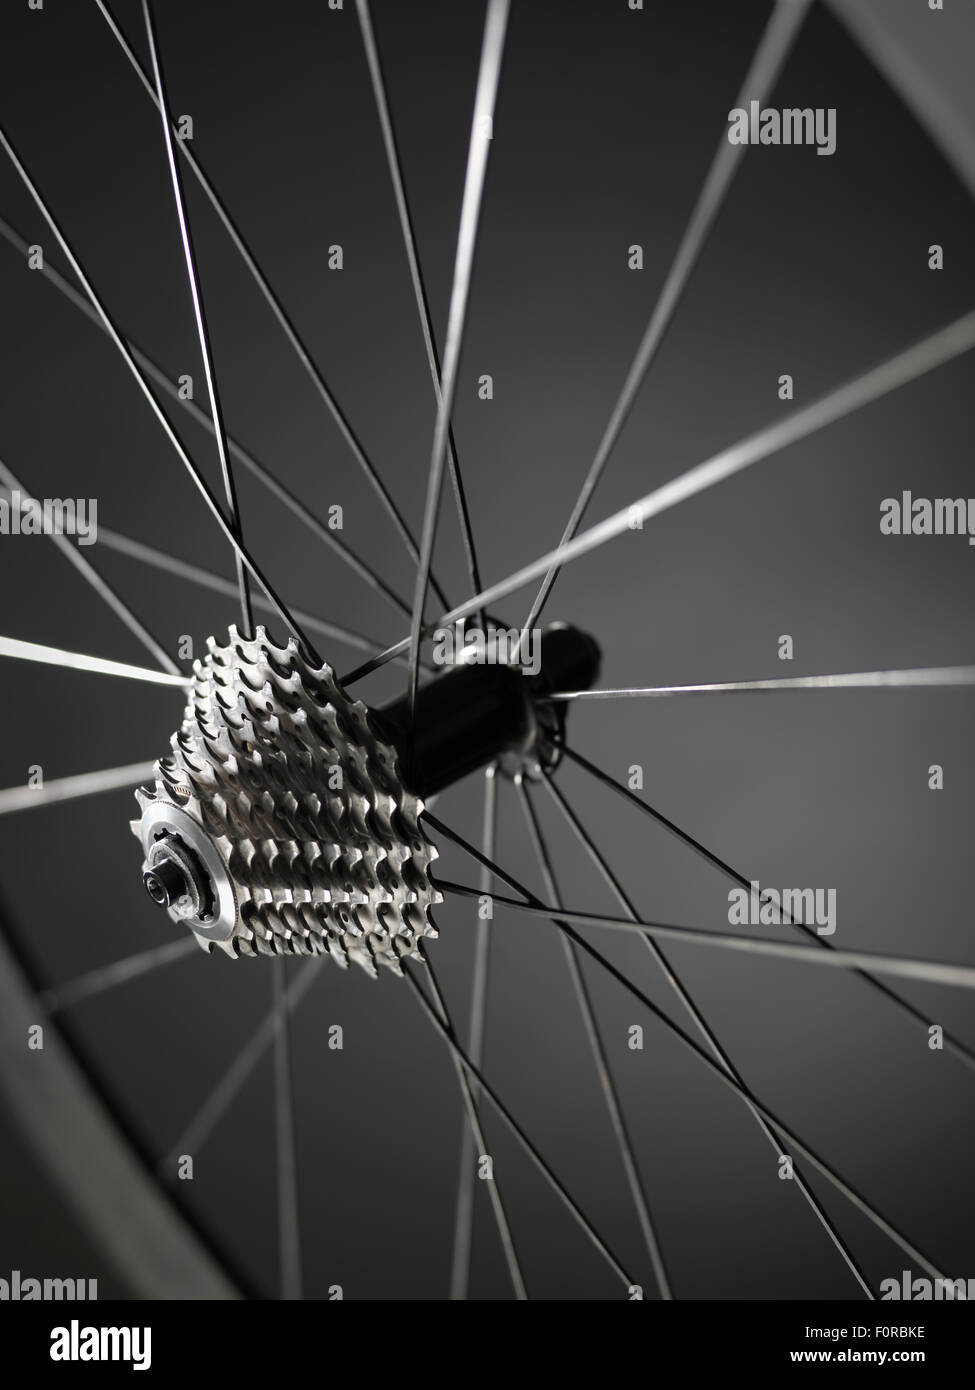 close up shot of bicycle wheel showing gears or cogs with a shallow depth of field showing spokes and rim. The shot has bee take Stock Photo